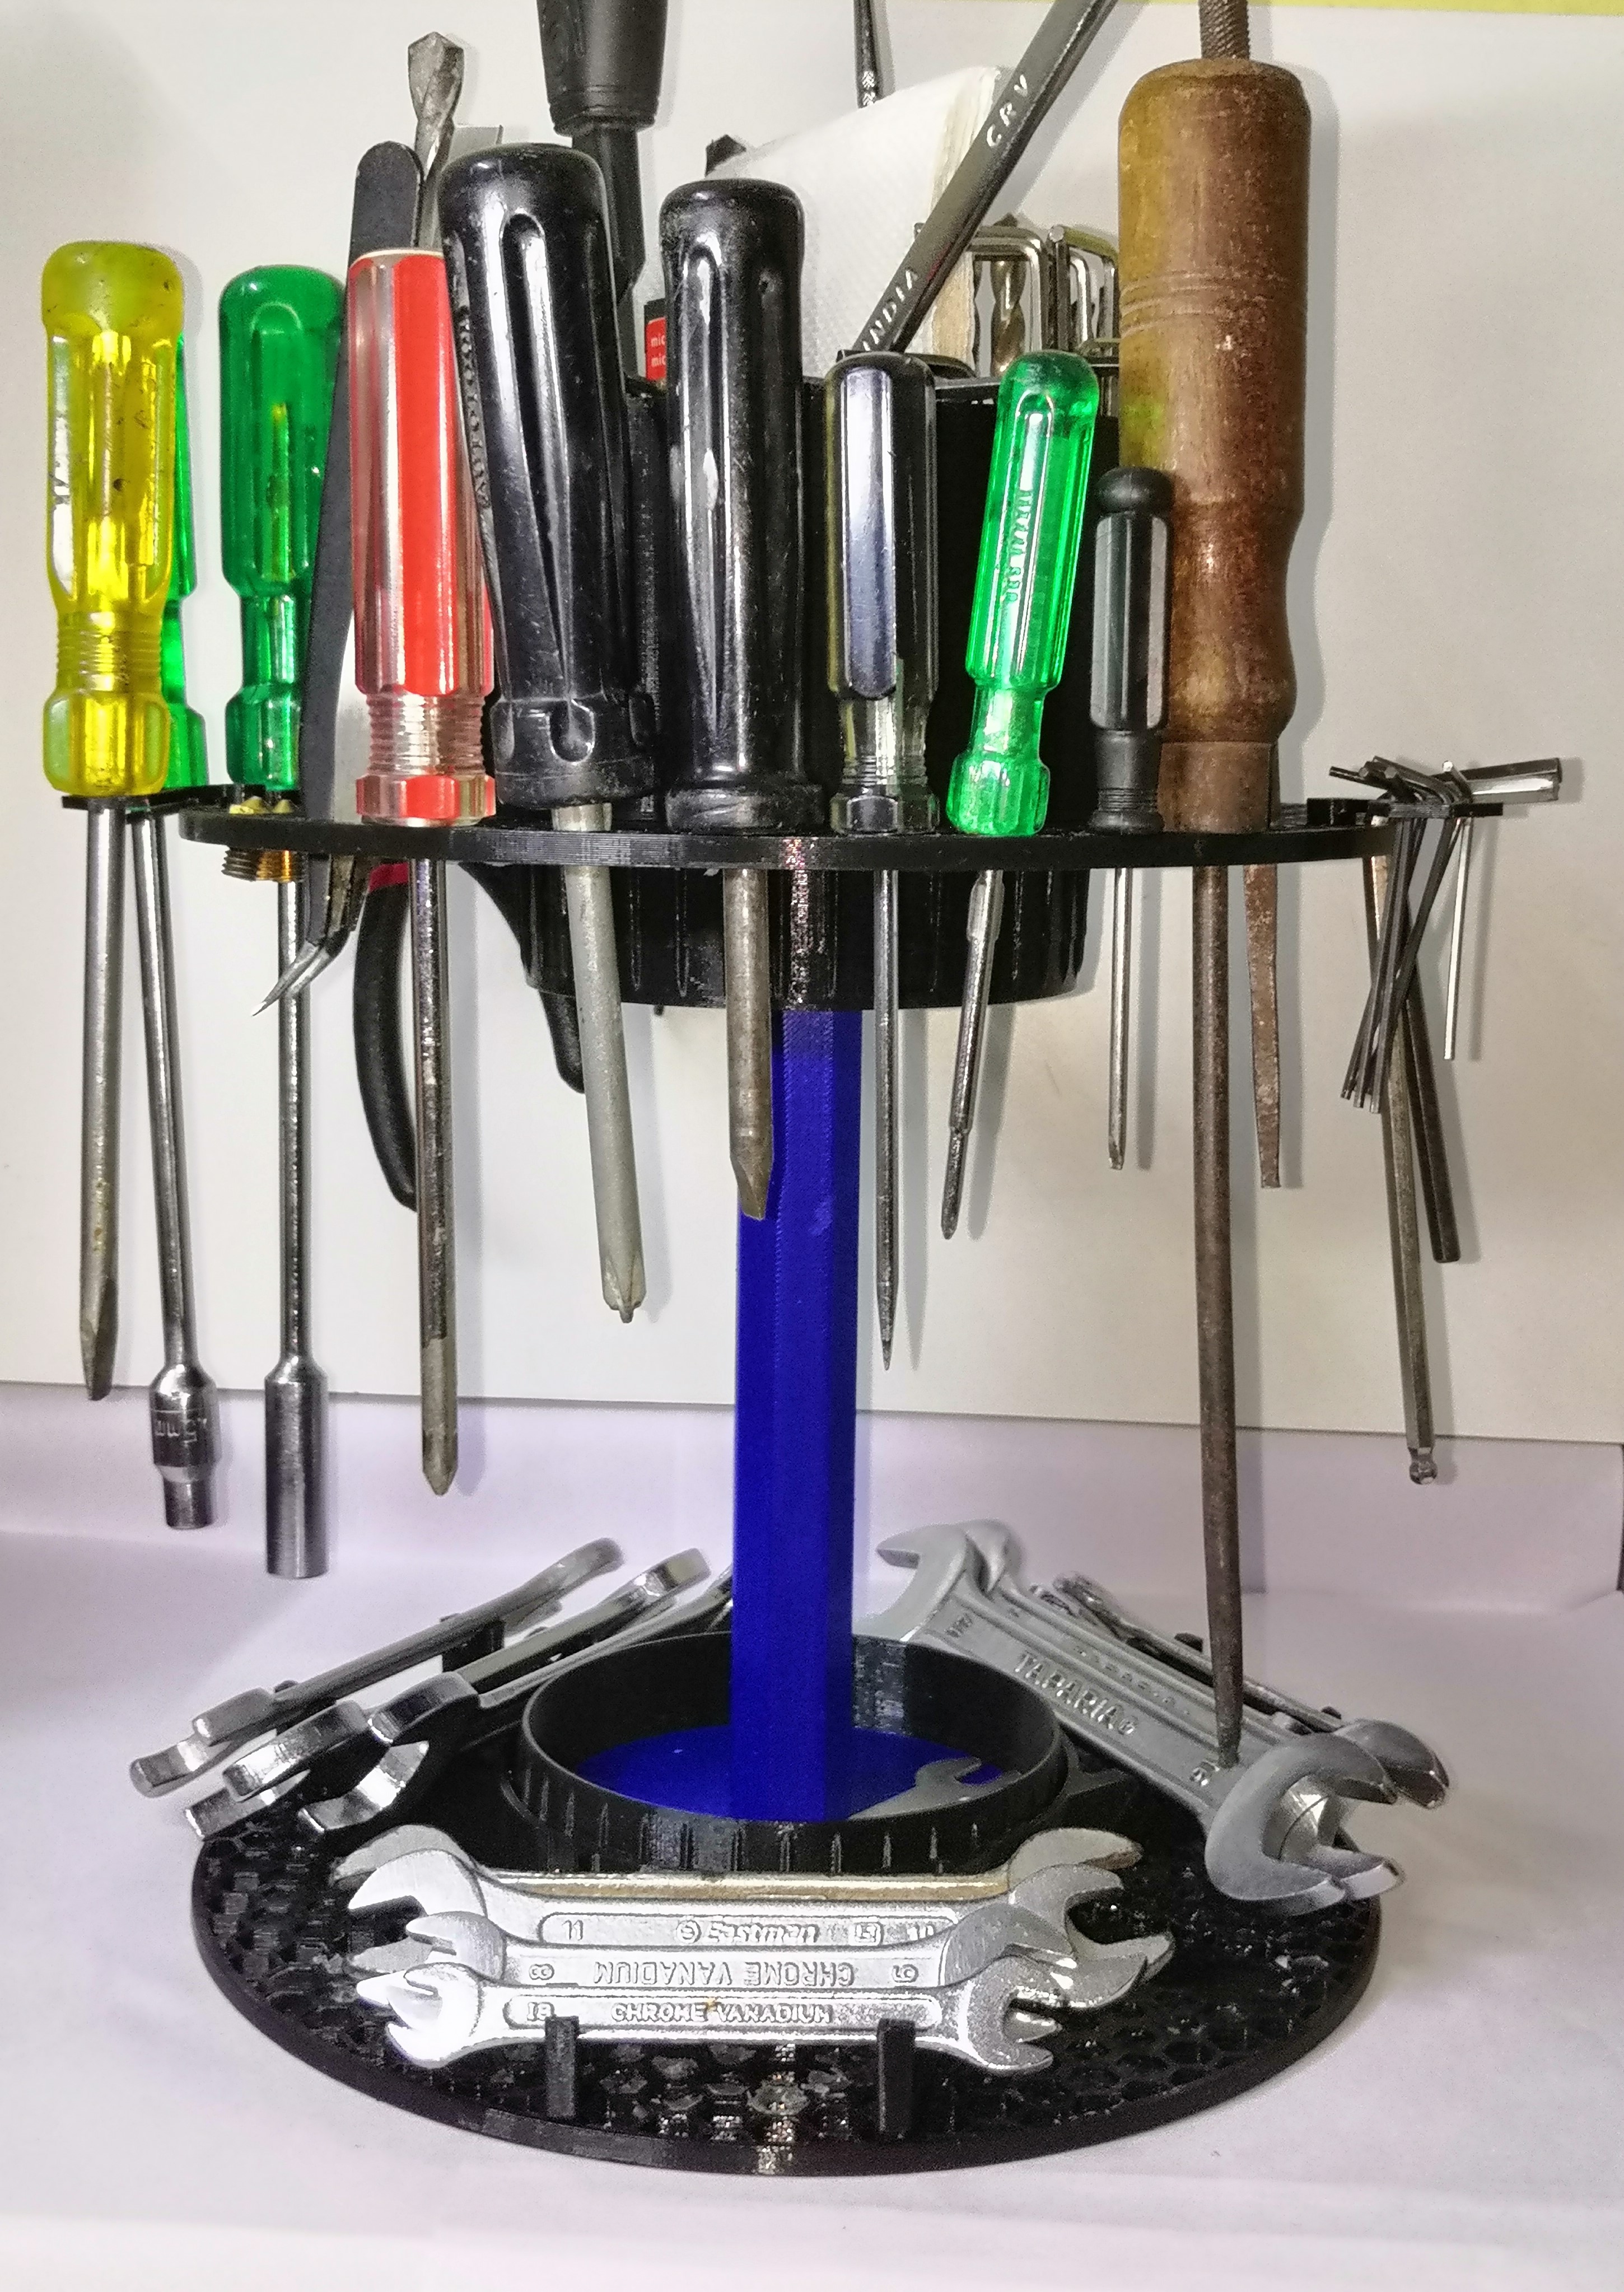 Tool Station - All in one tool organizer using prusament spool